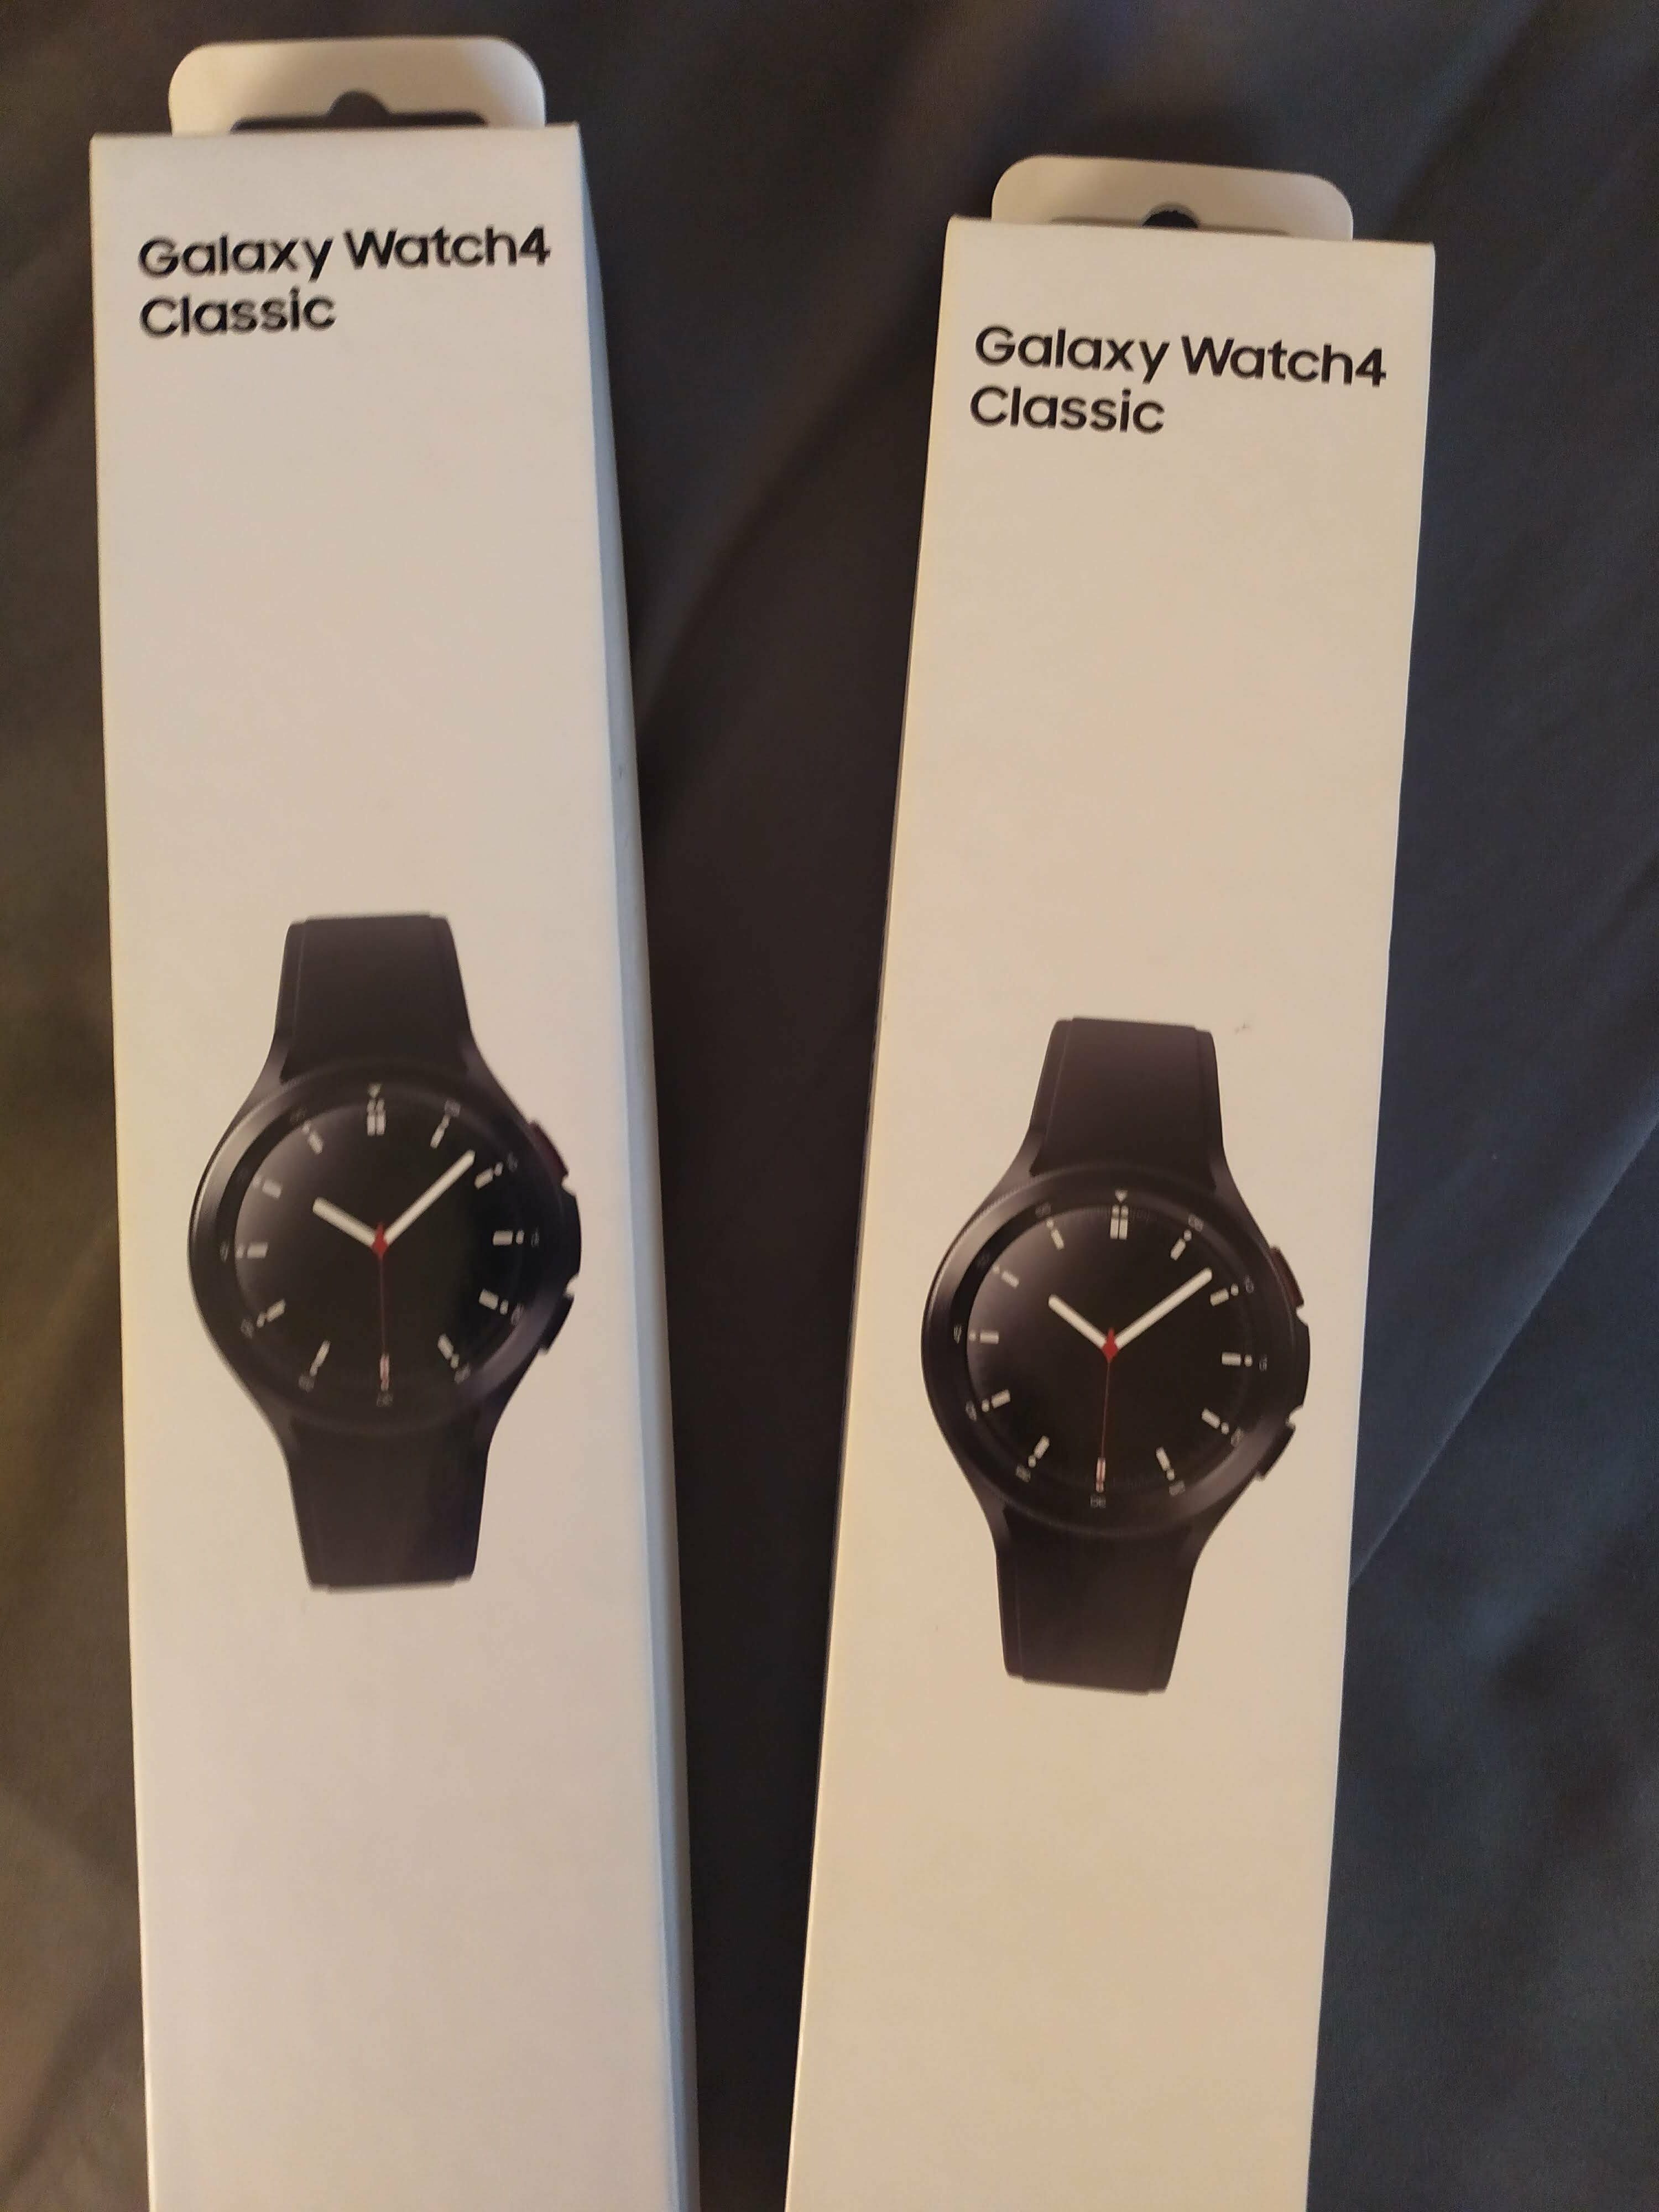 [YMMV] Walmart] - Samsung Watch4 - 46MM Classic $99 Limited Forums Stock - - In-Store Only RedFlagDeals.com Galaxy